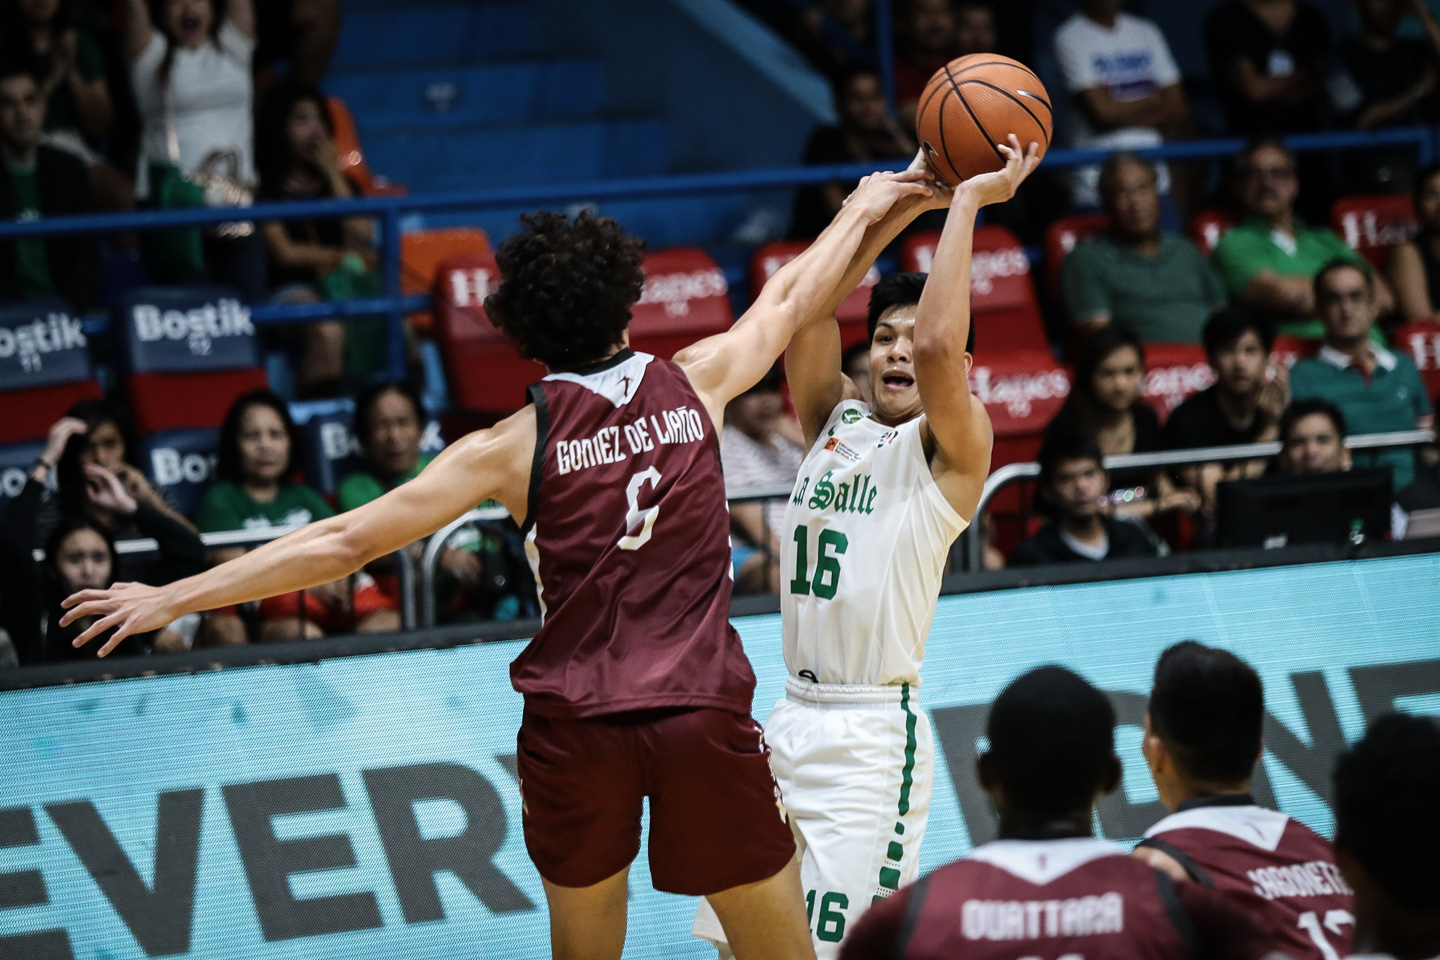 COMPOSED. The De La Salle University Green Archers squander a double-digit lead late but hold on to the victory in the Filoil Flying V Premier Cup opener. File photo by Josh Albelda/Rappler 